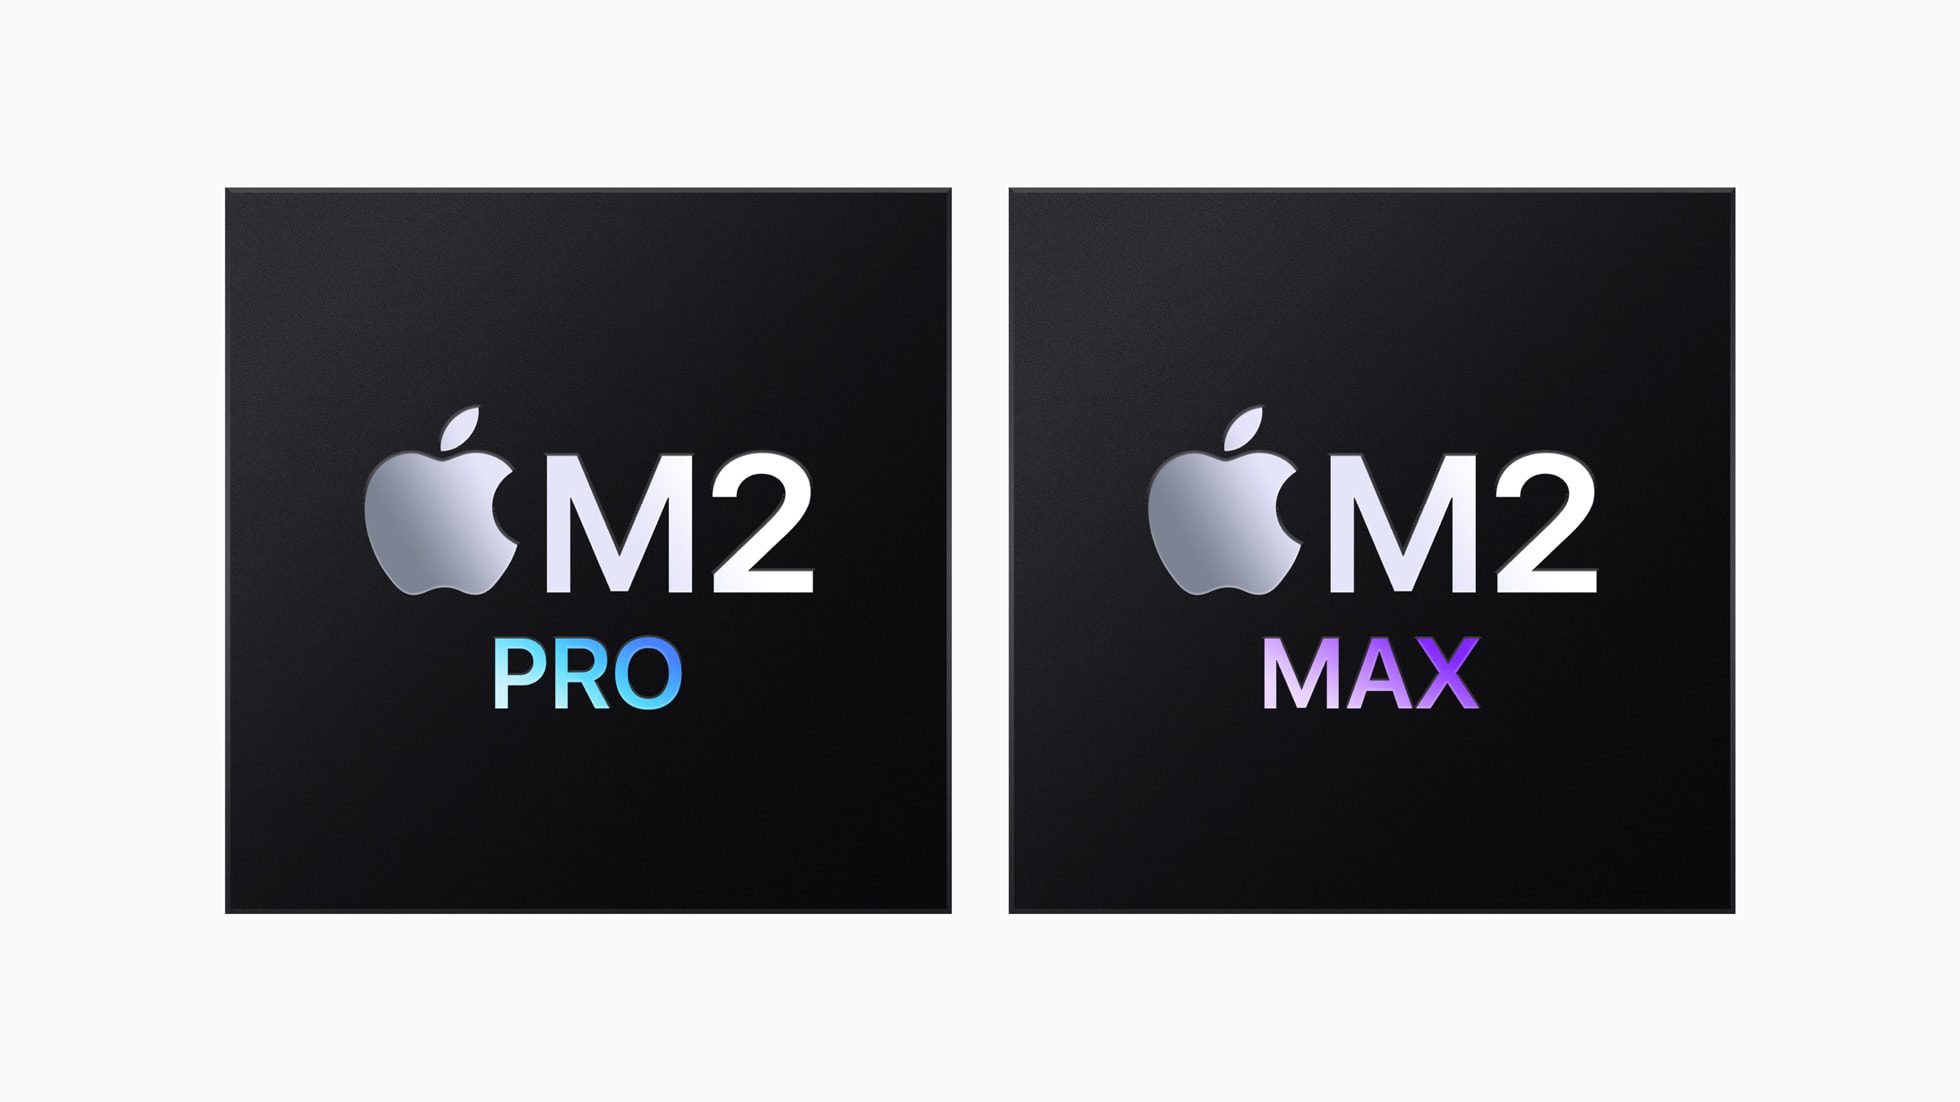 The Apple M2 Pro and M2 Max advance the lightning chart further